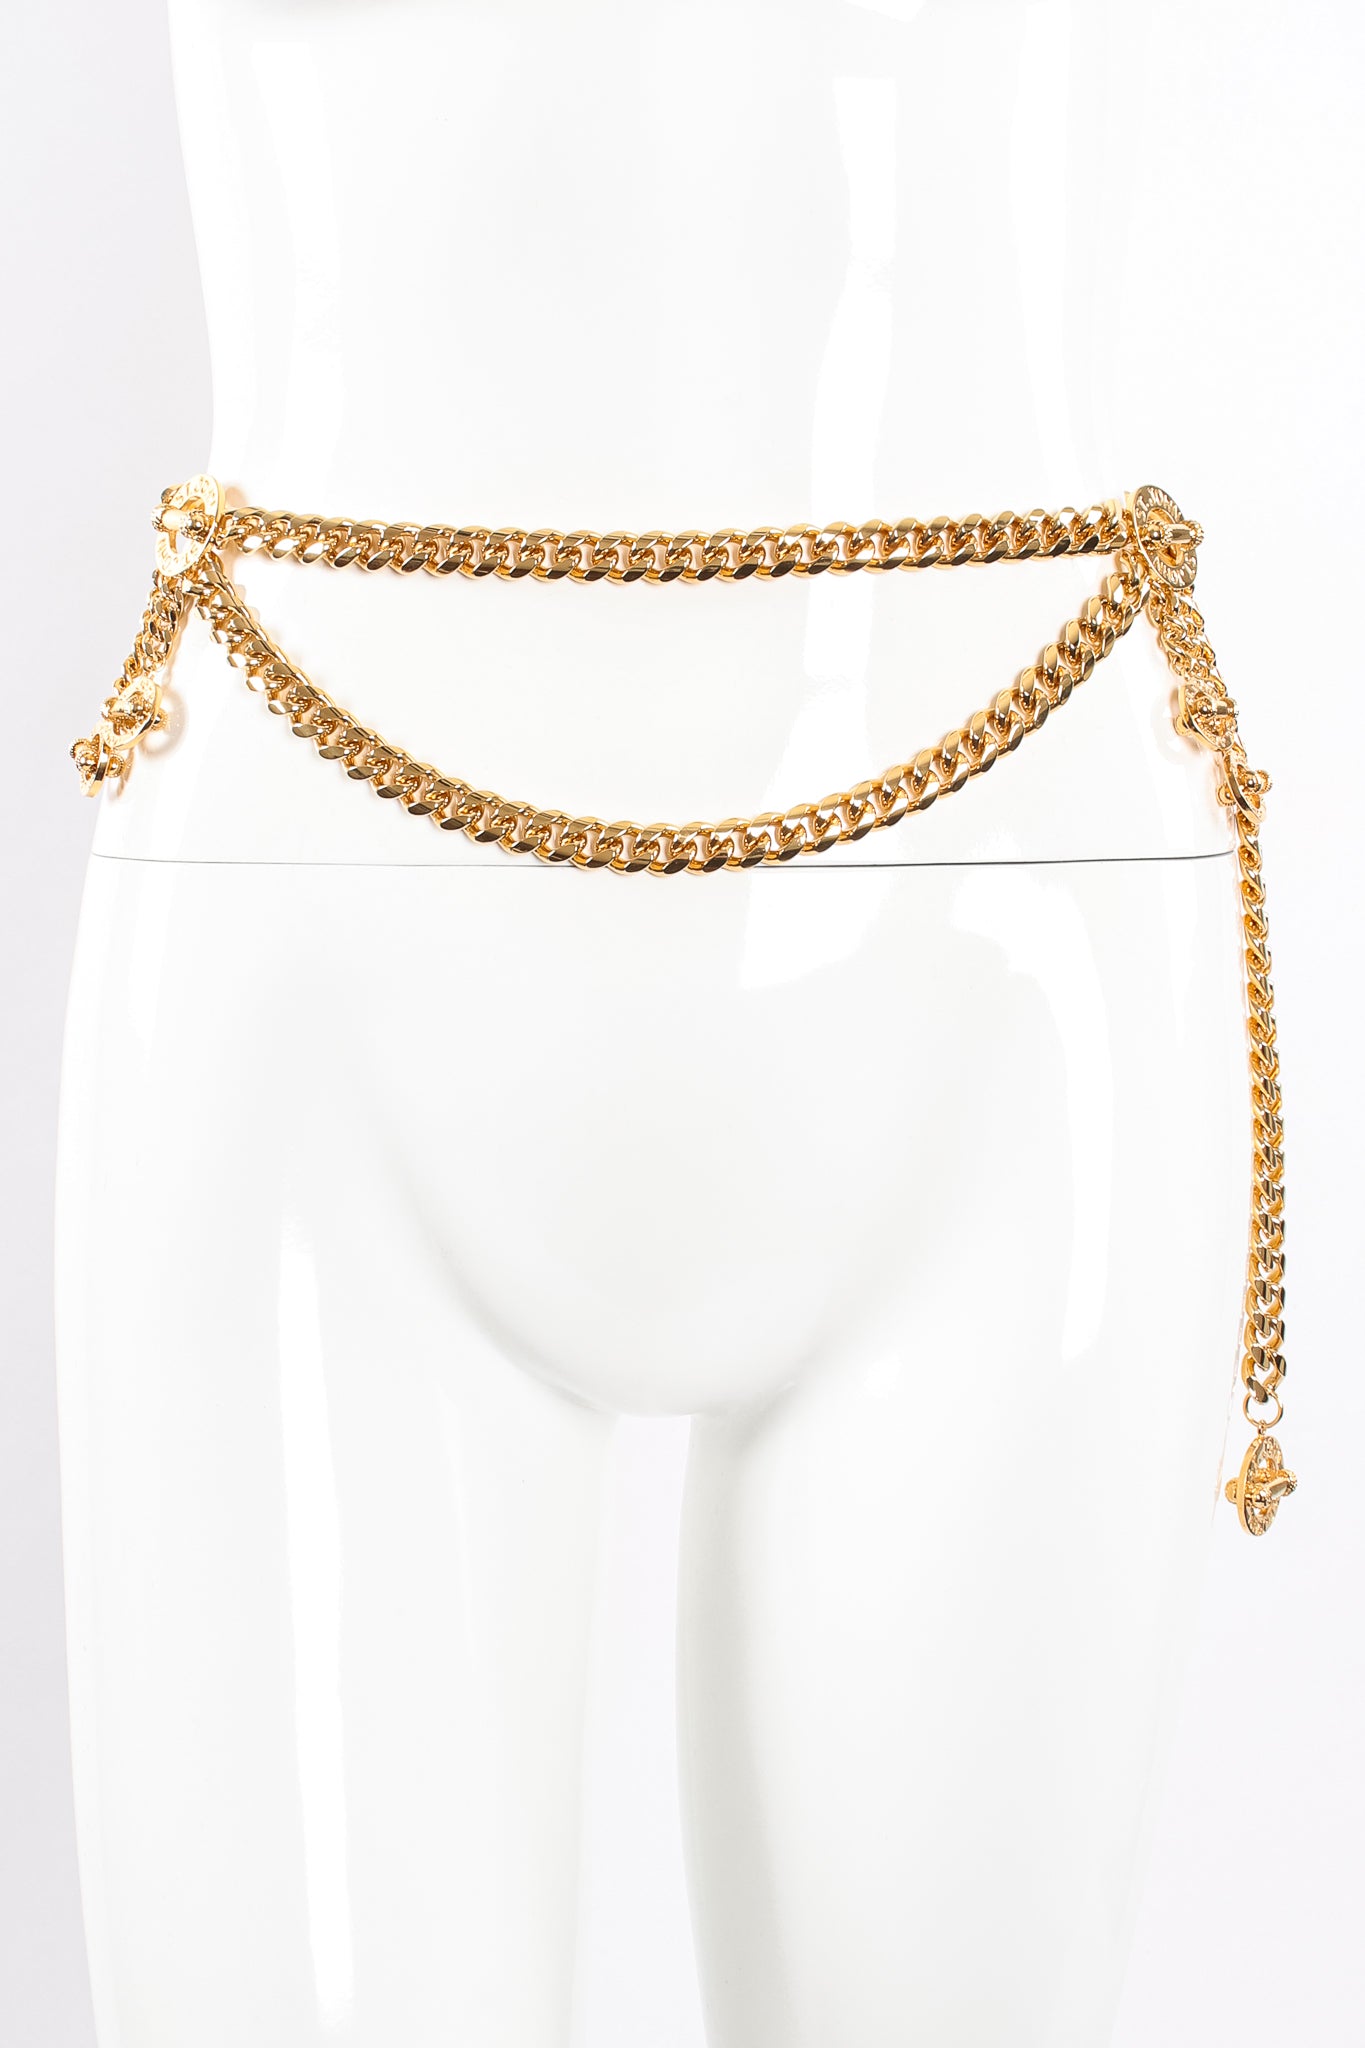 Vintage St John Draped Toggle Charm Chain Belt on Mannequin at Recess Los Angeles